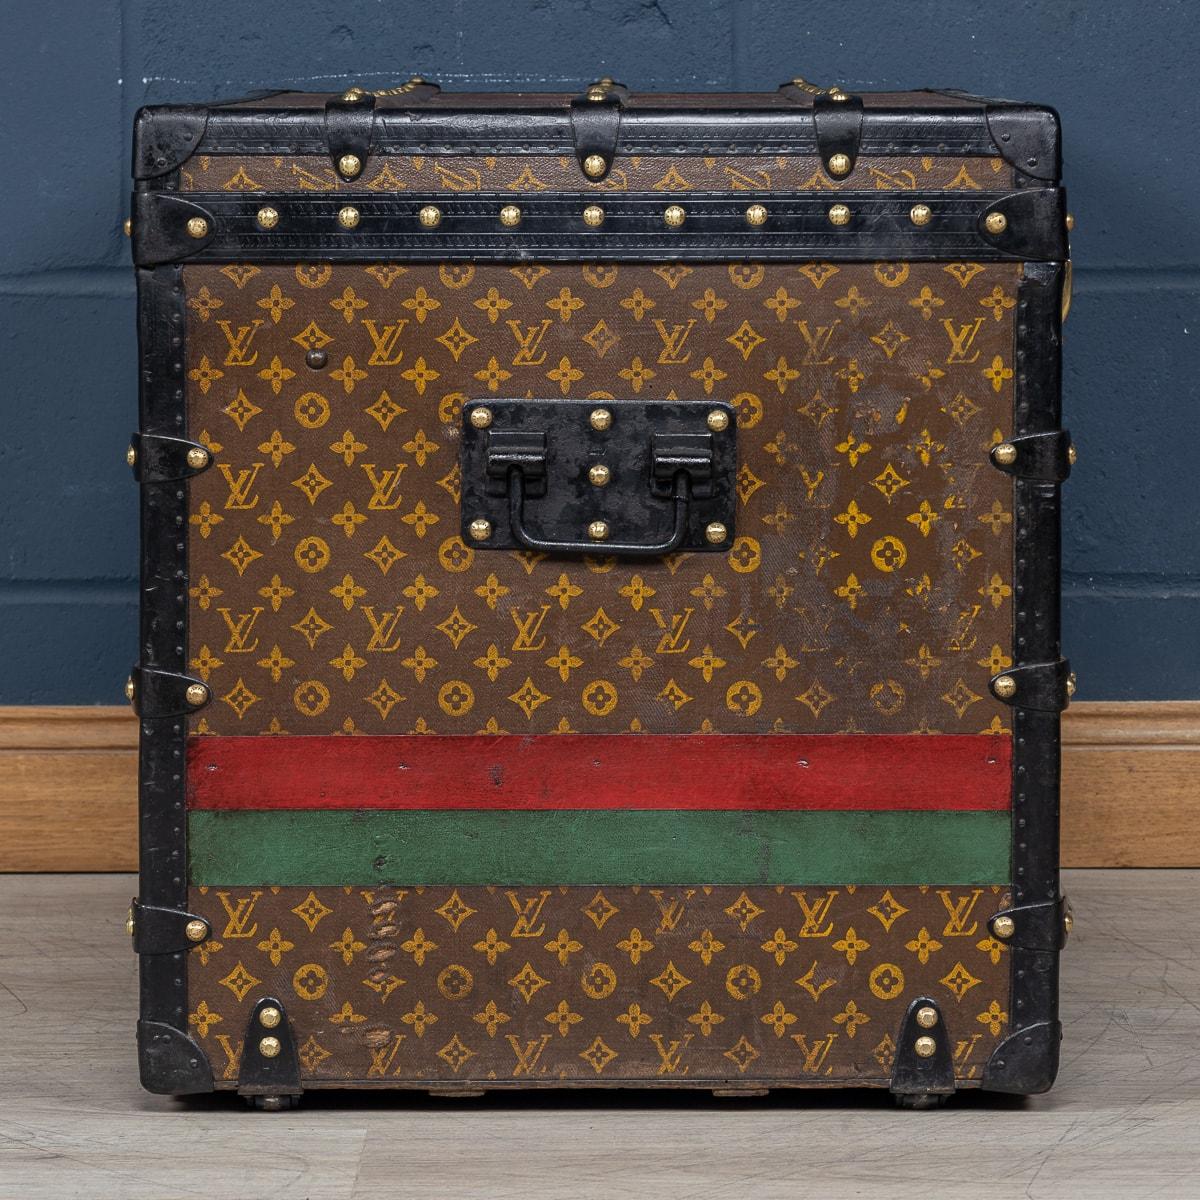 20th Century Louis Vuitton Courier Trunk In Monogram Canvas, France c.1910 In Good Condition For Sale In Royal Tunbridge Wells, Kent